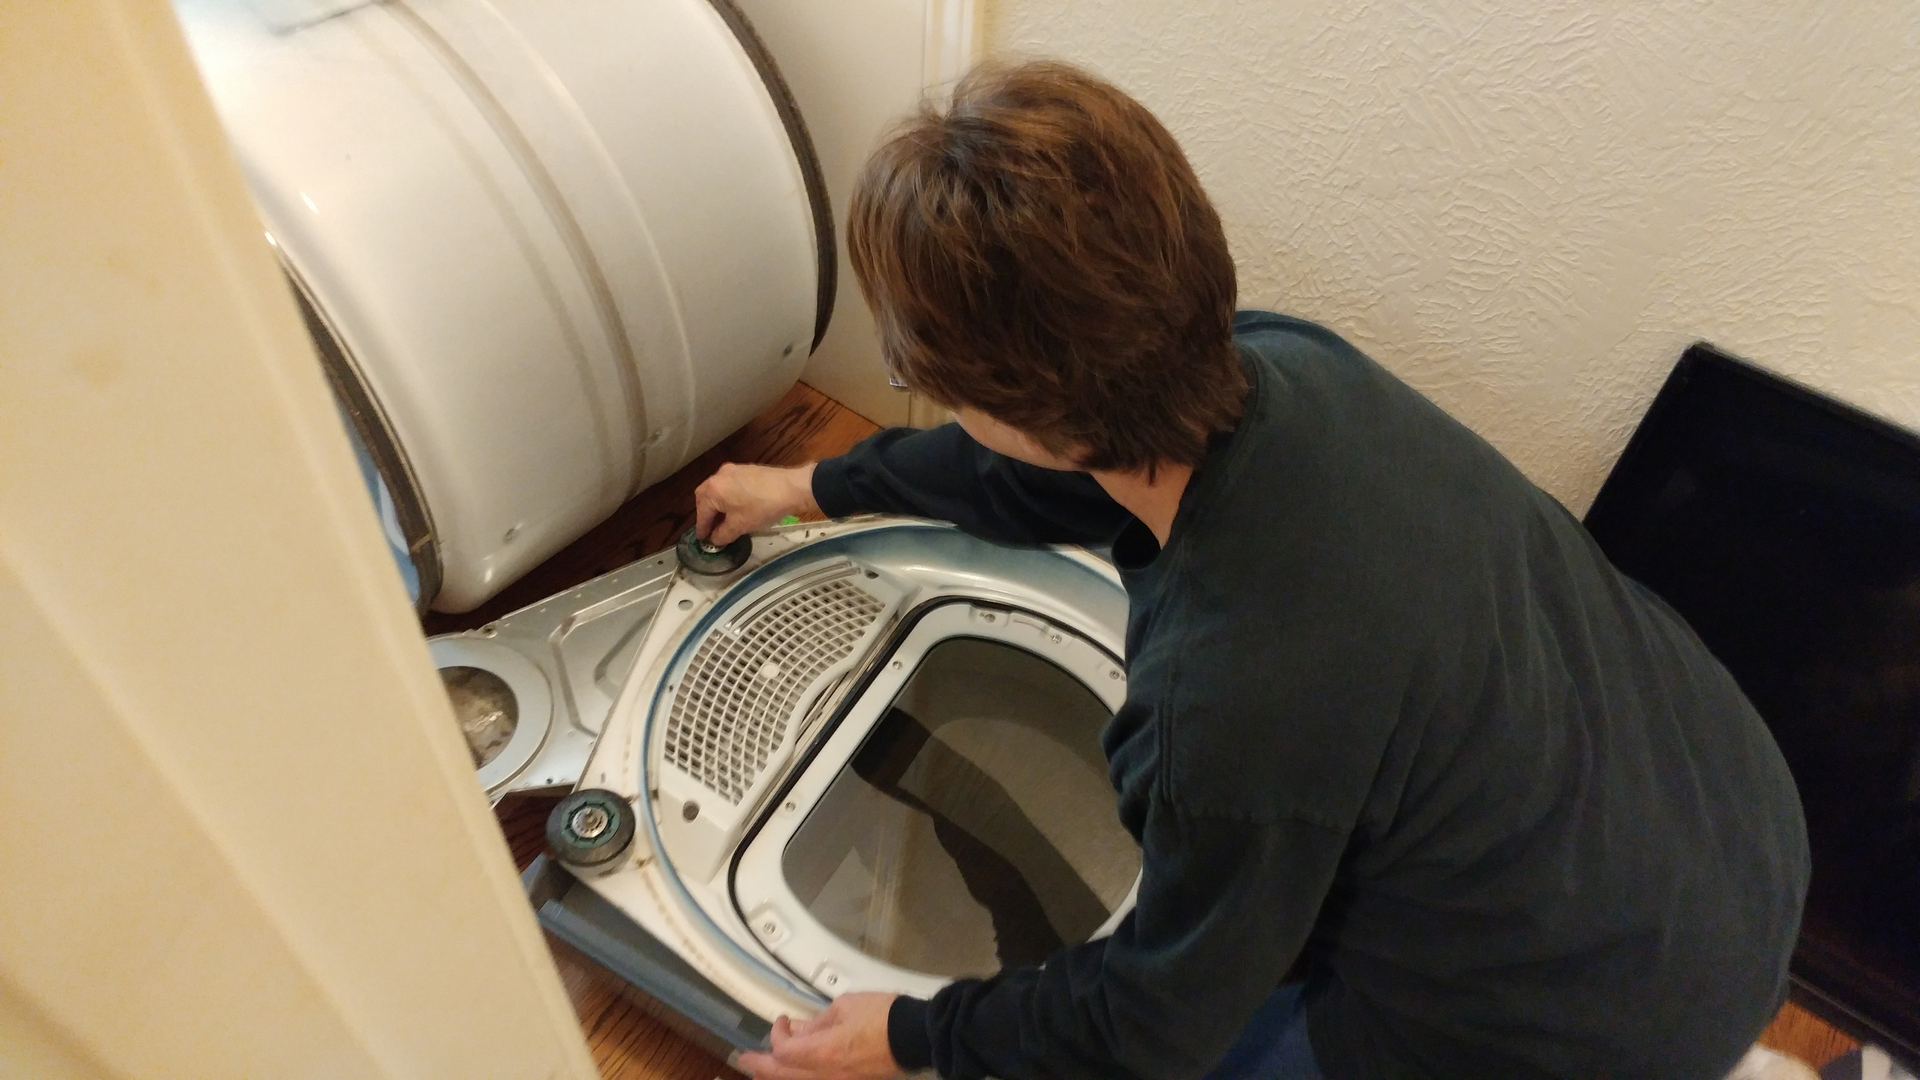 Appliance Repair Services in North Texas